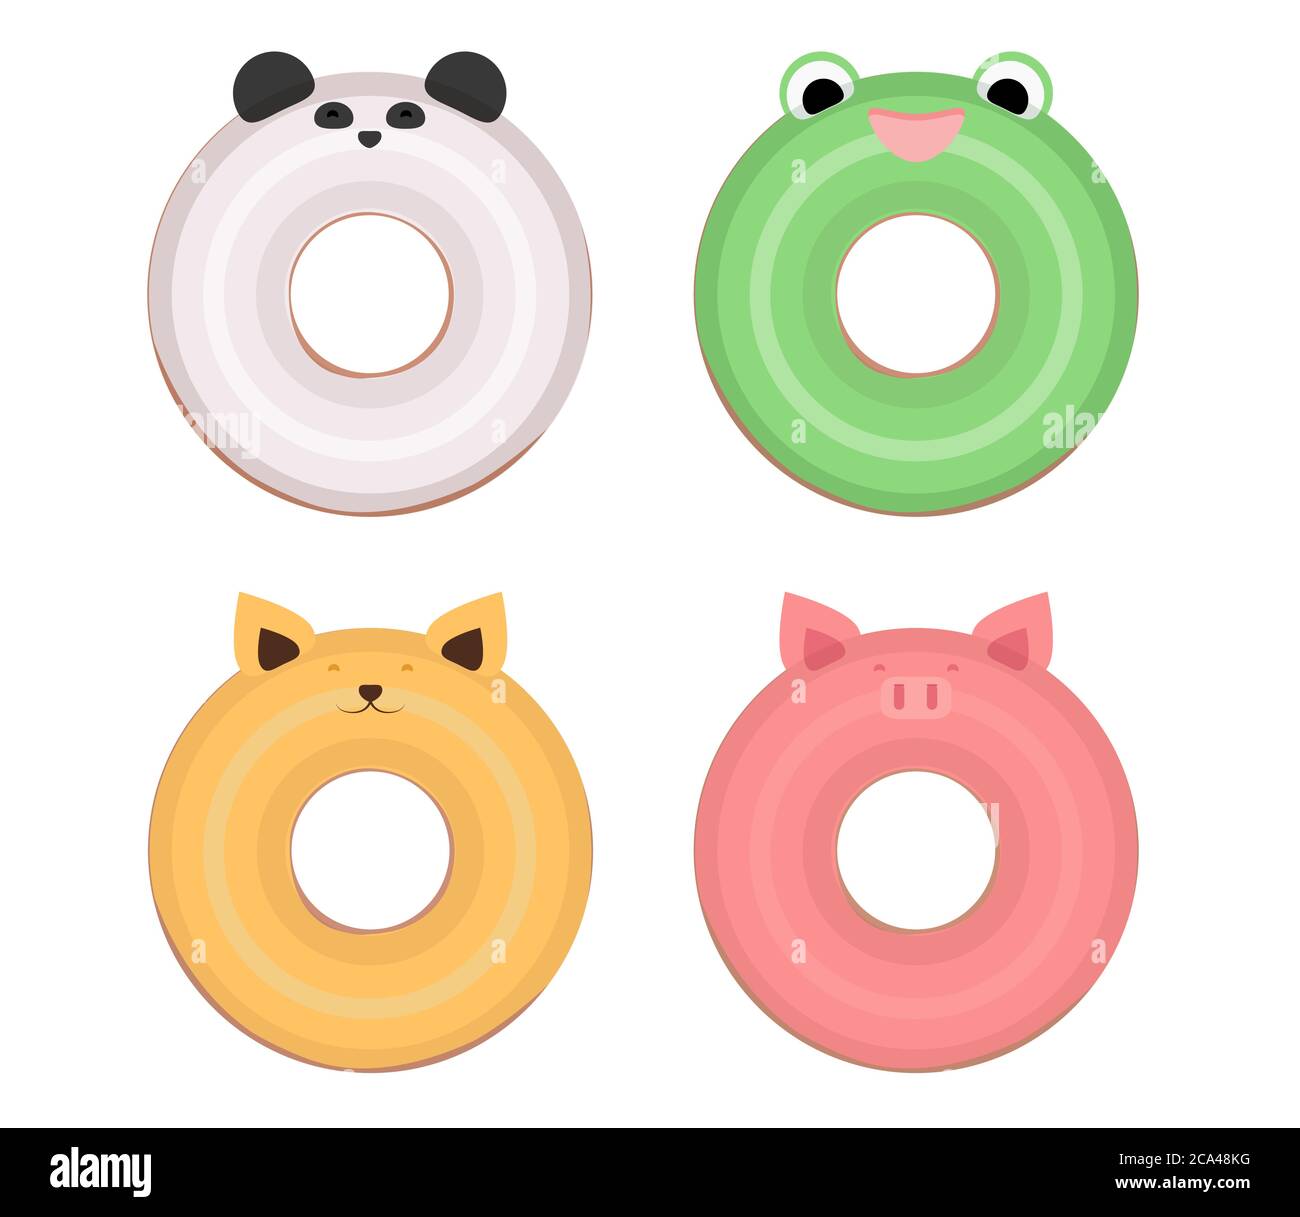 Set flat illustration donuts with muzzles of animals. Vector element separately from the background. Stock Vector